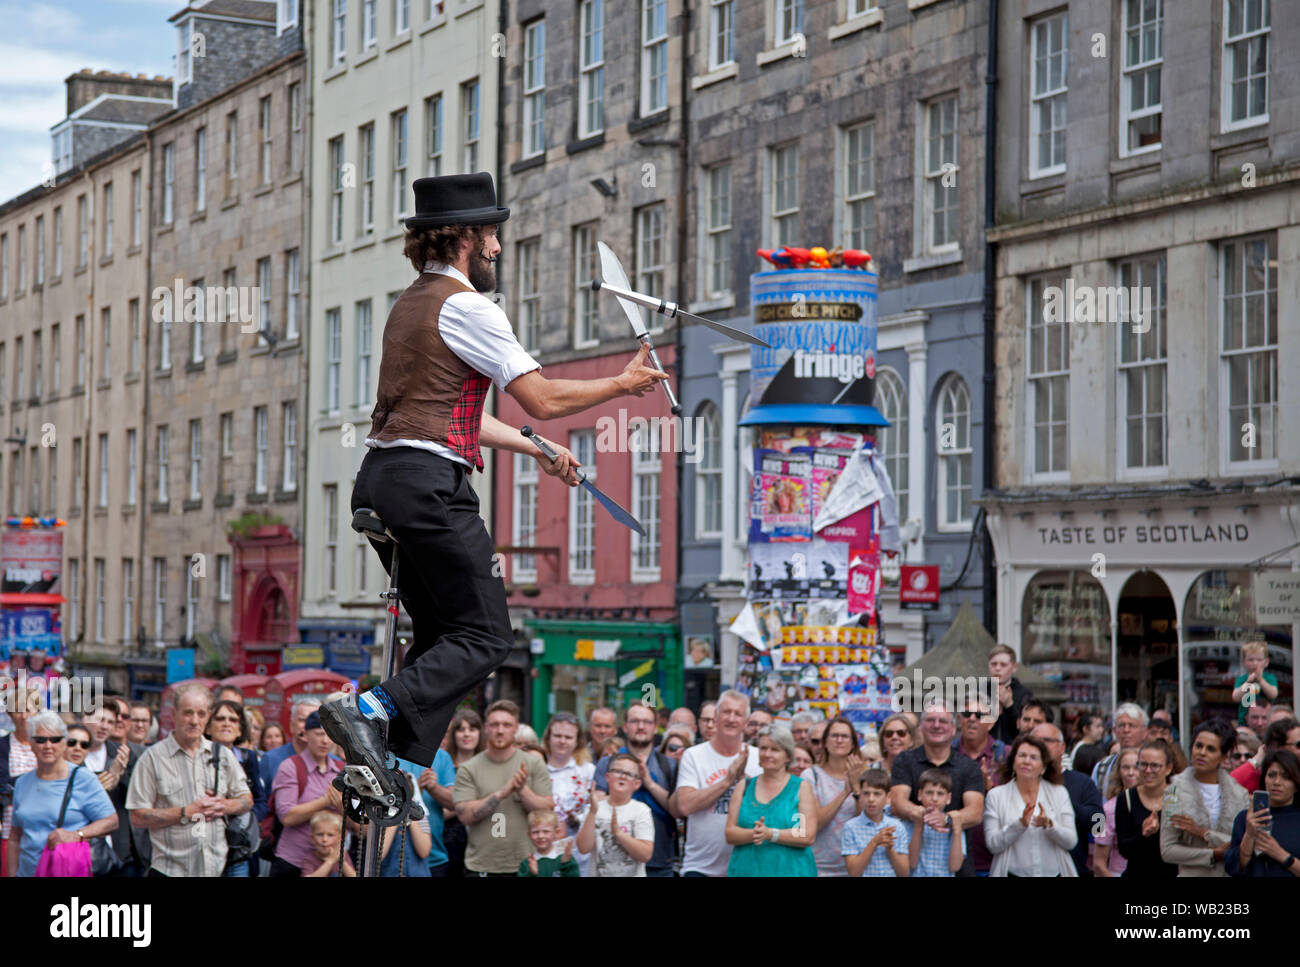 Royal Mile, Edinburgh, Scotland, UK. 23rd August 2019. Street Performer Patrick juggler and unicycle rider entertains the audience on the High Street. Stock Photo